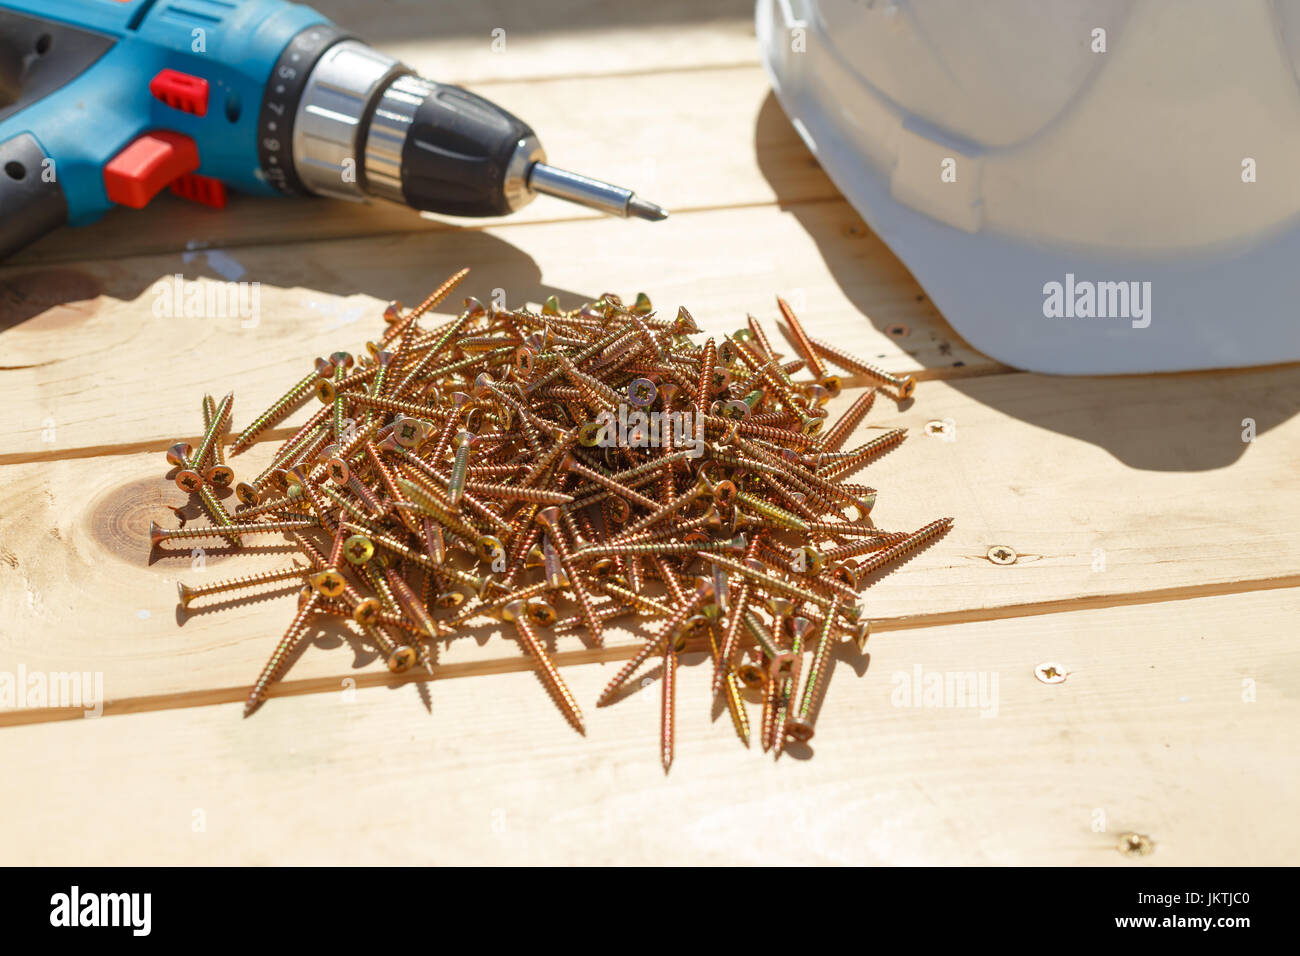 Tools for the construction of a wooden floor or terrace. Screwdriver, self-tapping screws and helmet on the wooden floor. View from above. Stock Photo